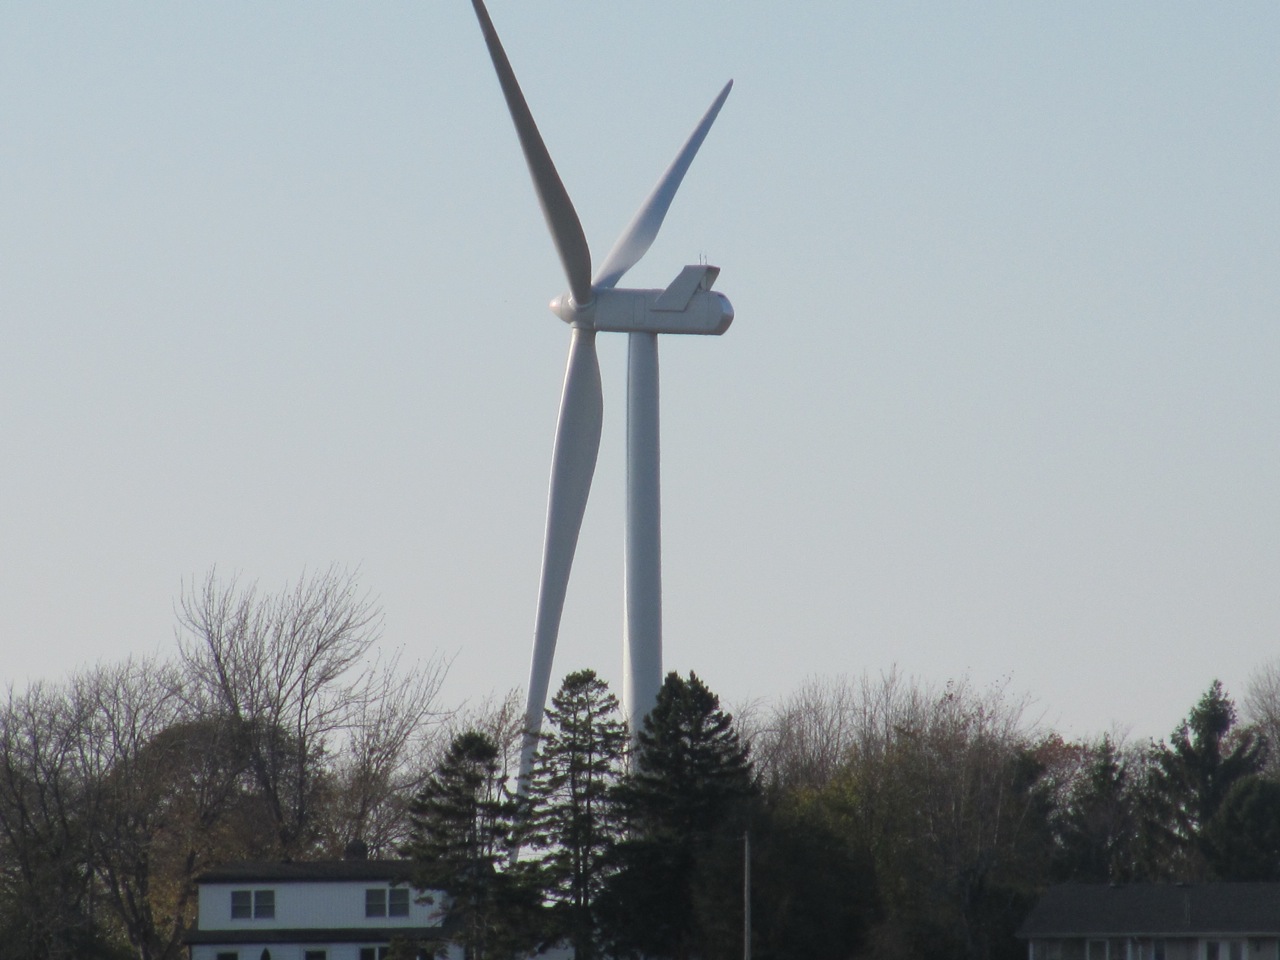 Consider your neighbours and community before signing wind turbine lease, says WCO: not true that there is no health risk president